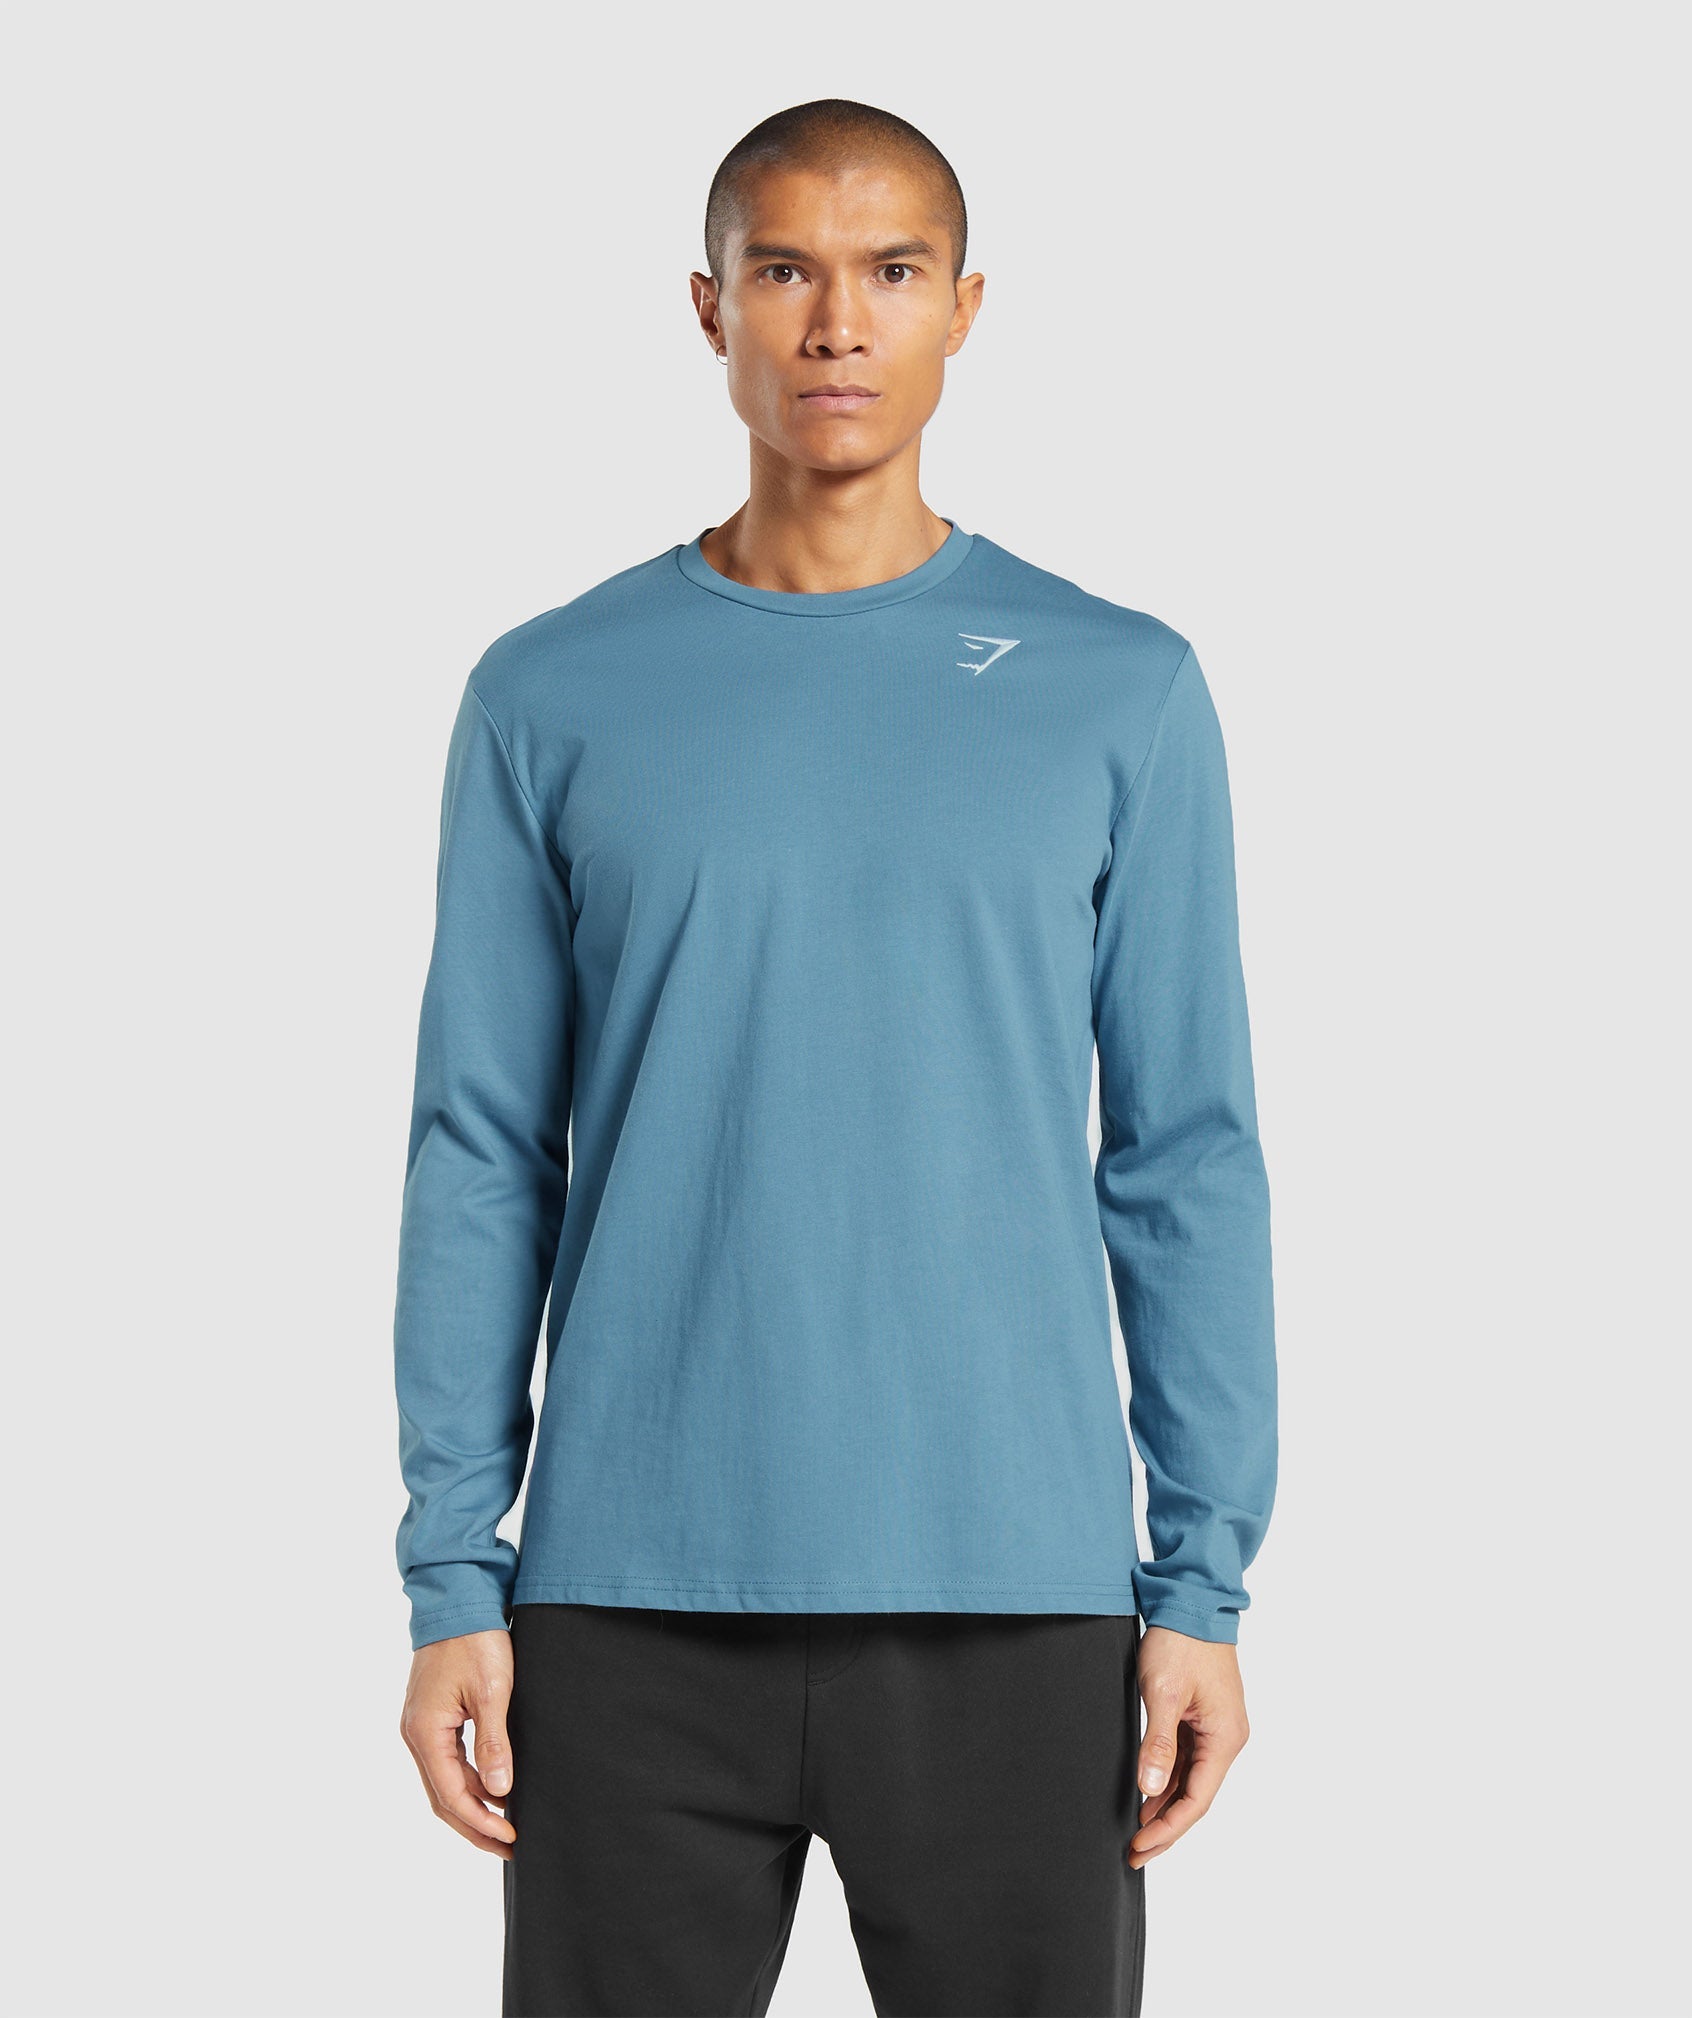 Crest Long Sleeve T-Shirt in Faded Blue ist nicht auf Lager